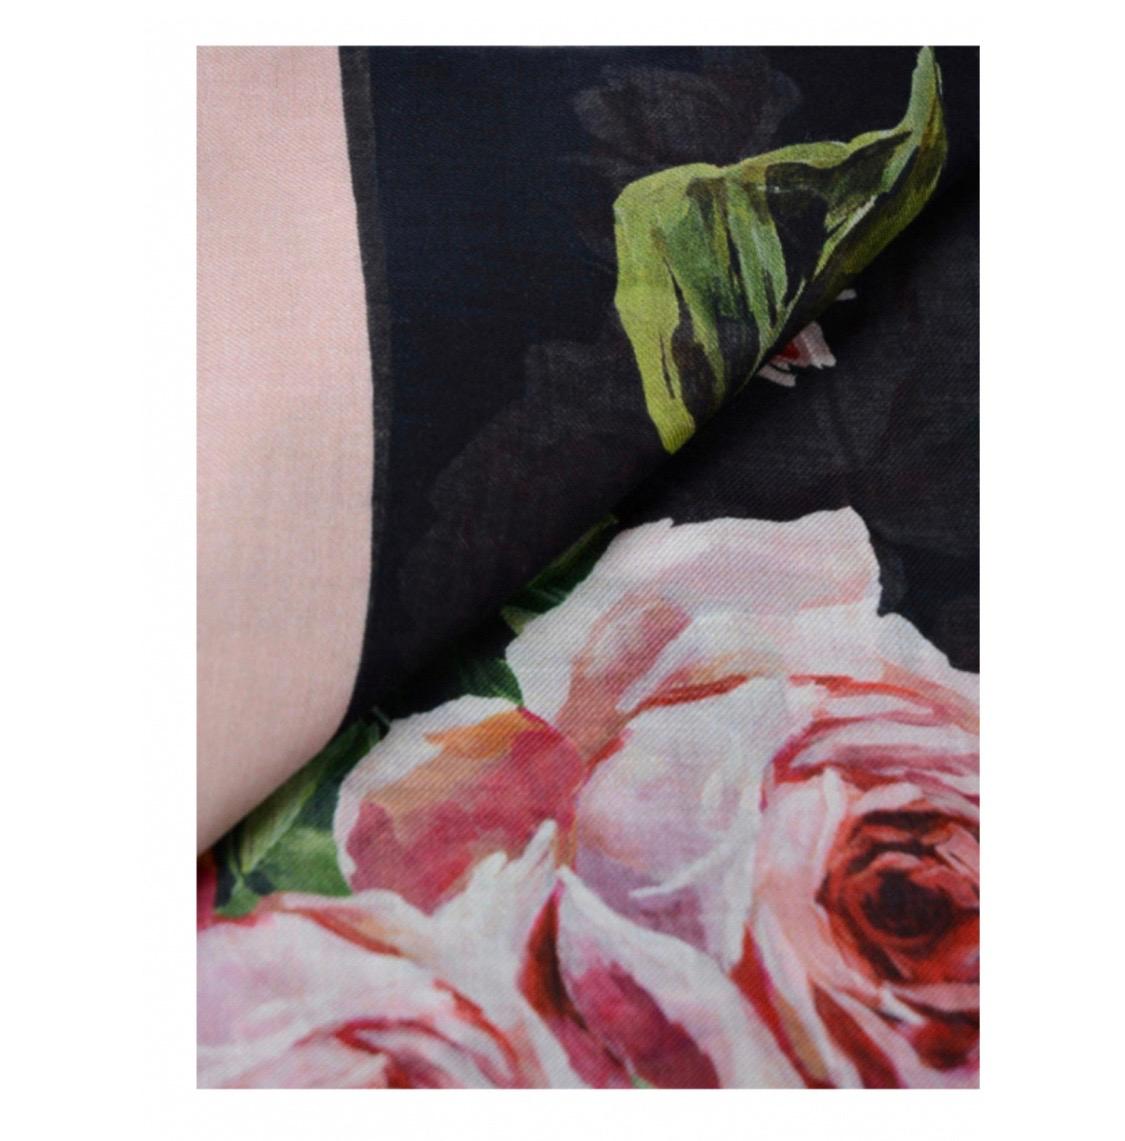 Women's Dolce & Gabbana Pink Rose
Butterfly printed cashmere modal
blended scarf wrap